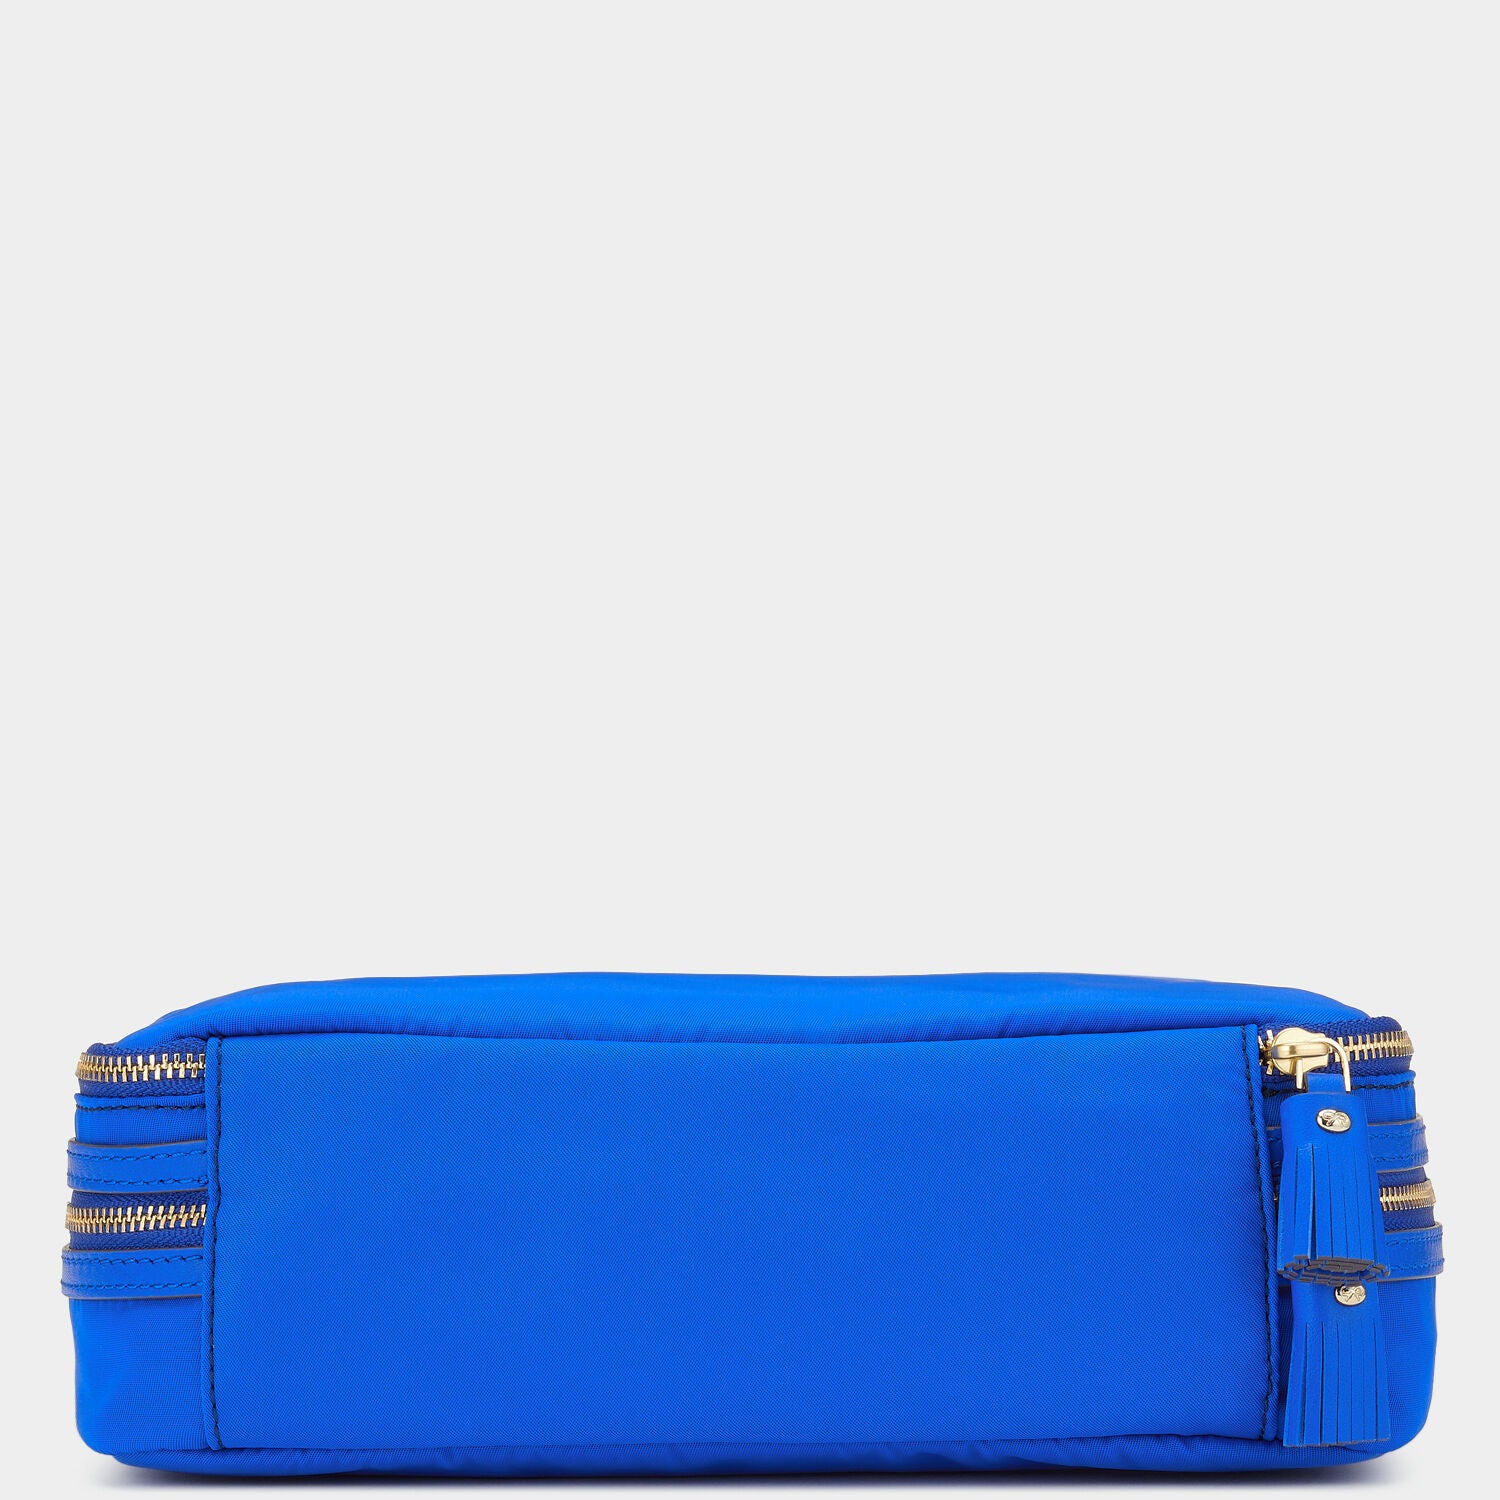 Make-Up Pouch  Anya Hindmarch UK